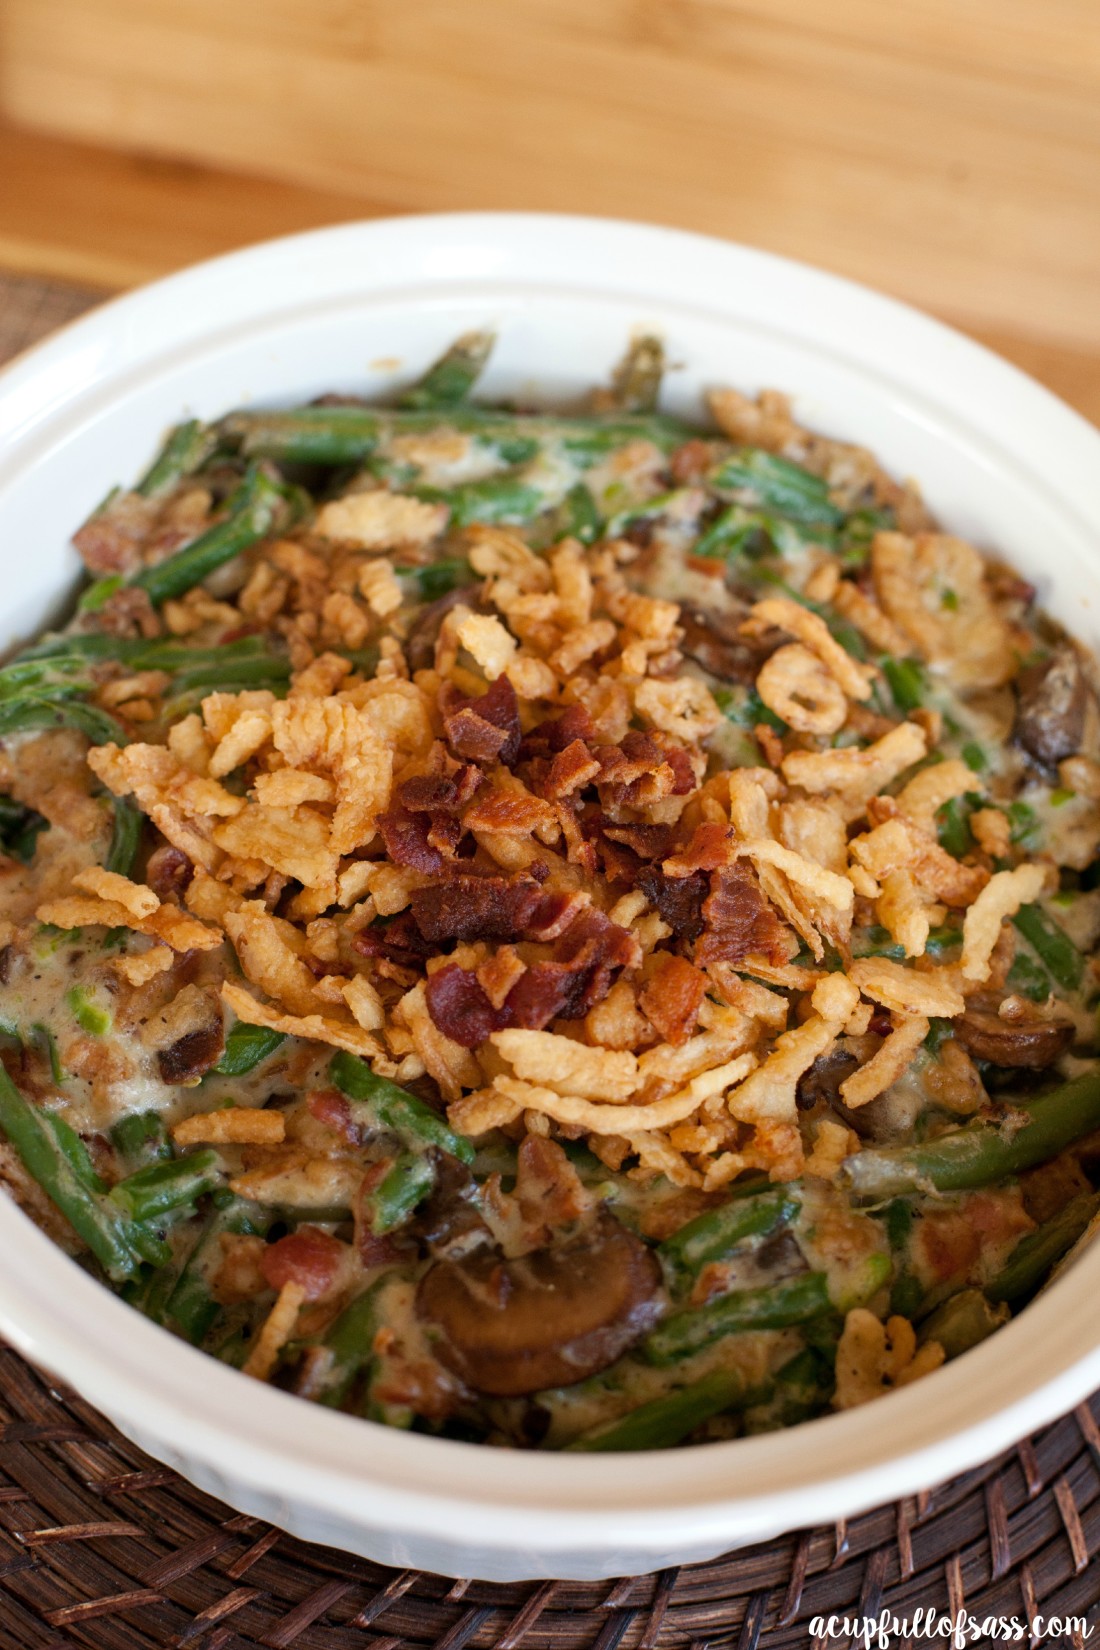 Bacon Green Bean Casserole for the holidays.This twist on your typical Green Bean Casserole will have your guest asking for seconds. #greenbean #greenbeancasserole #sidedish #bacon #homemade #casseole #bacongreenbeancasserole